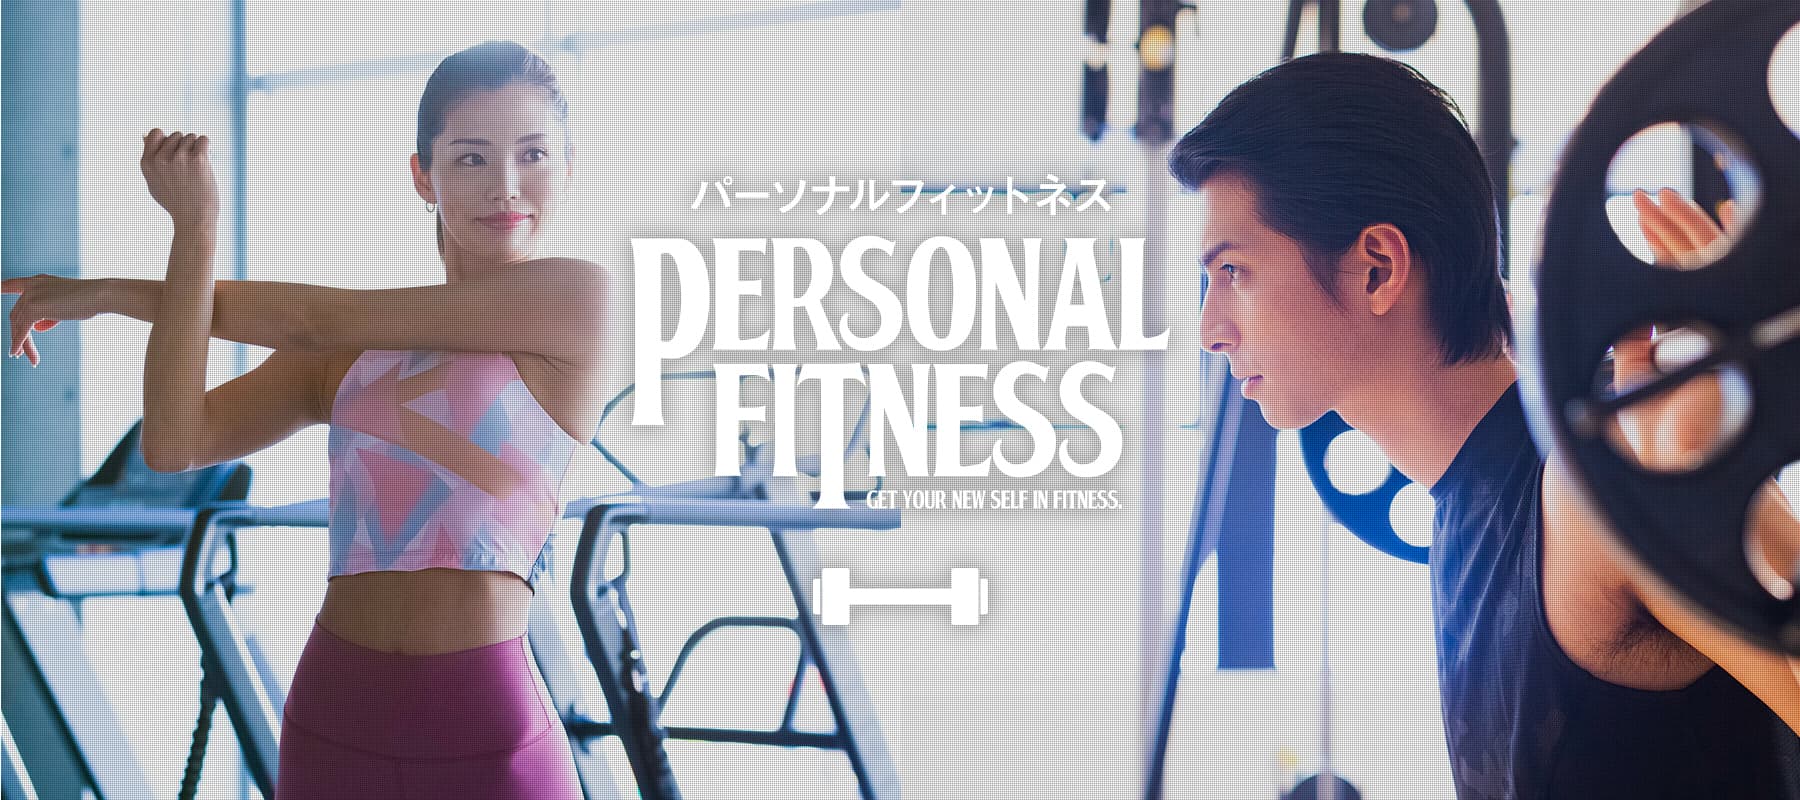 PERSONAL FITNESS